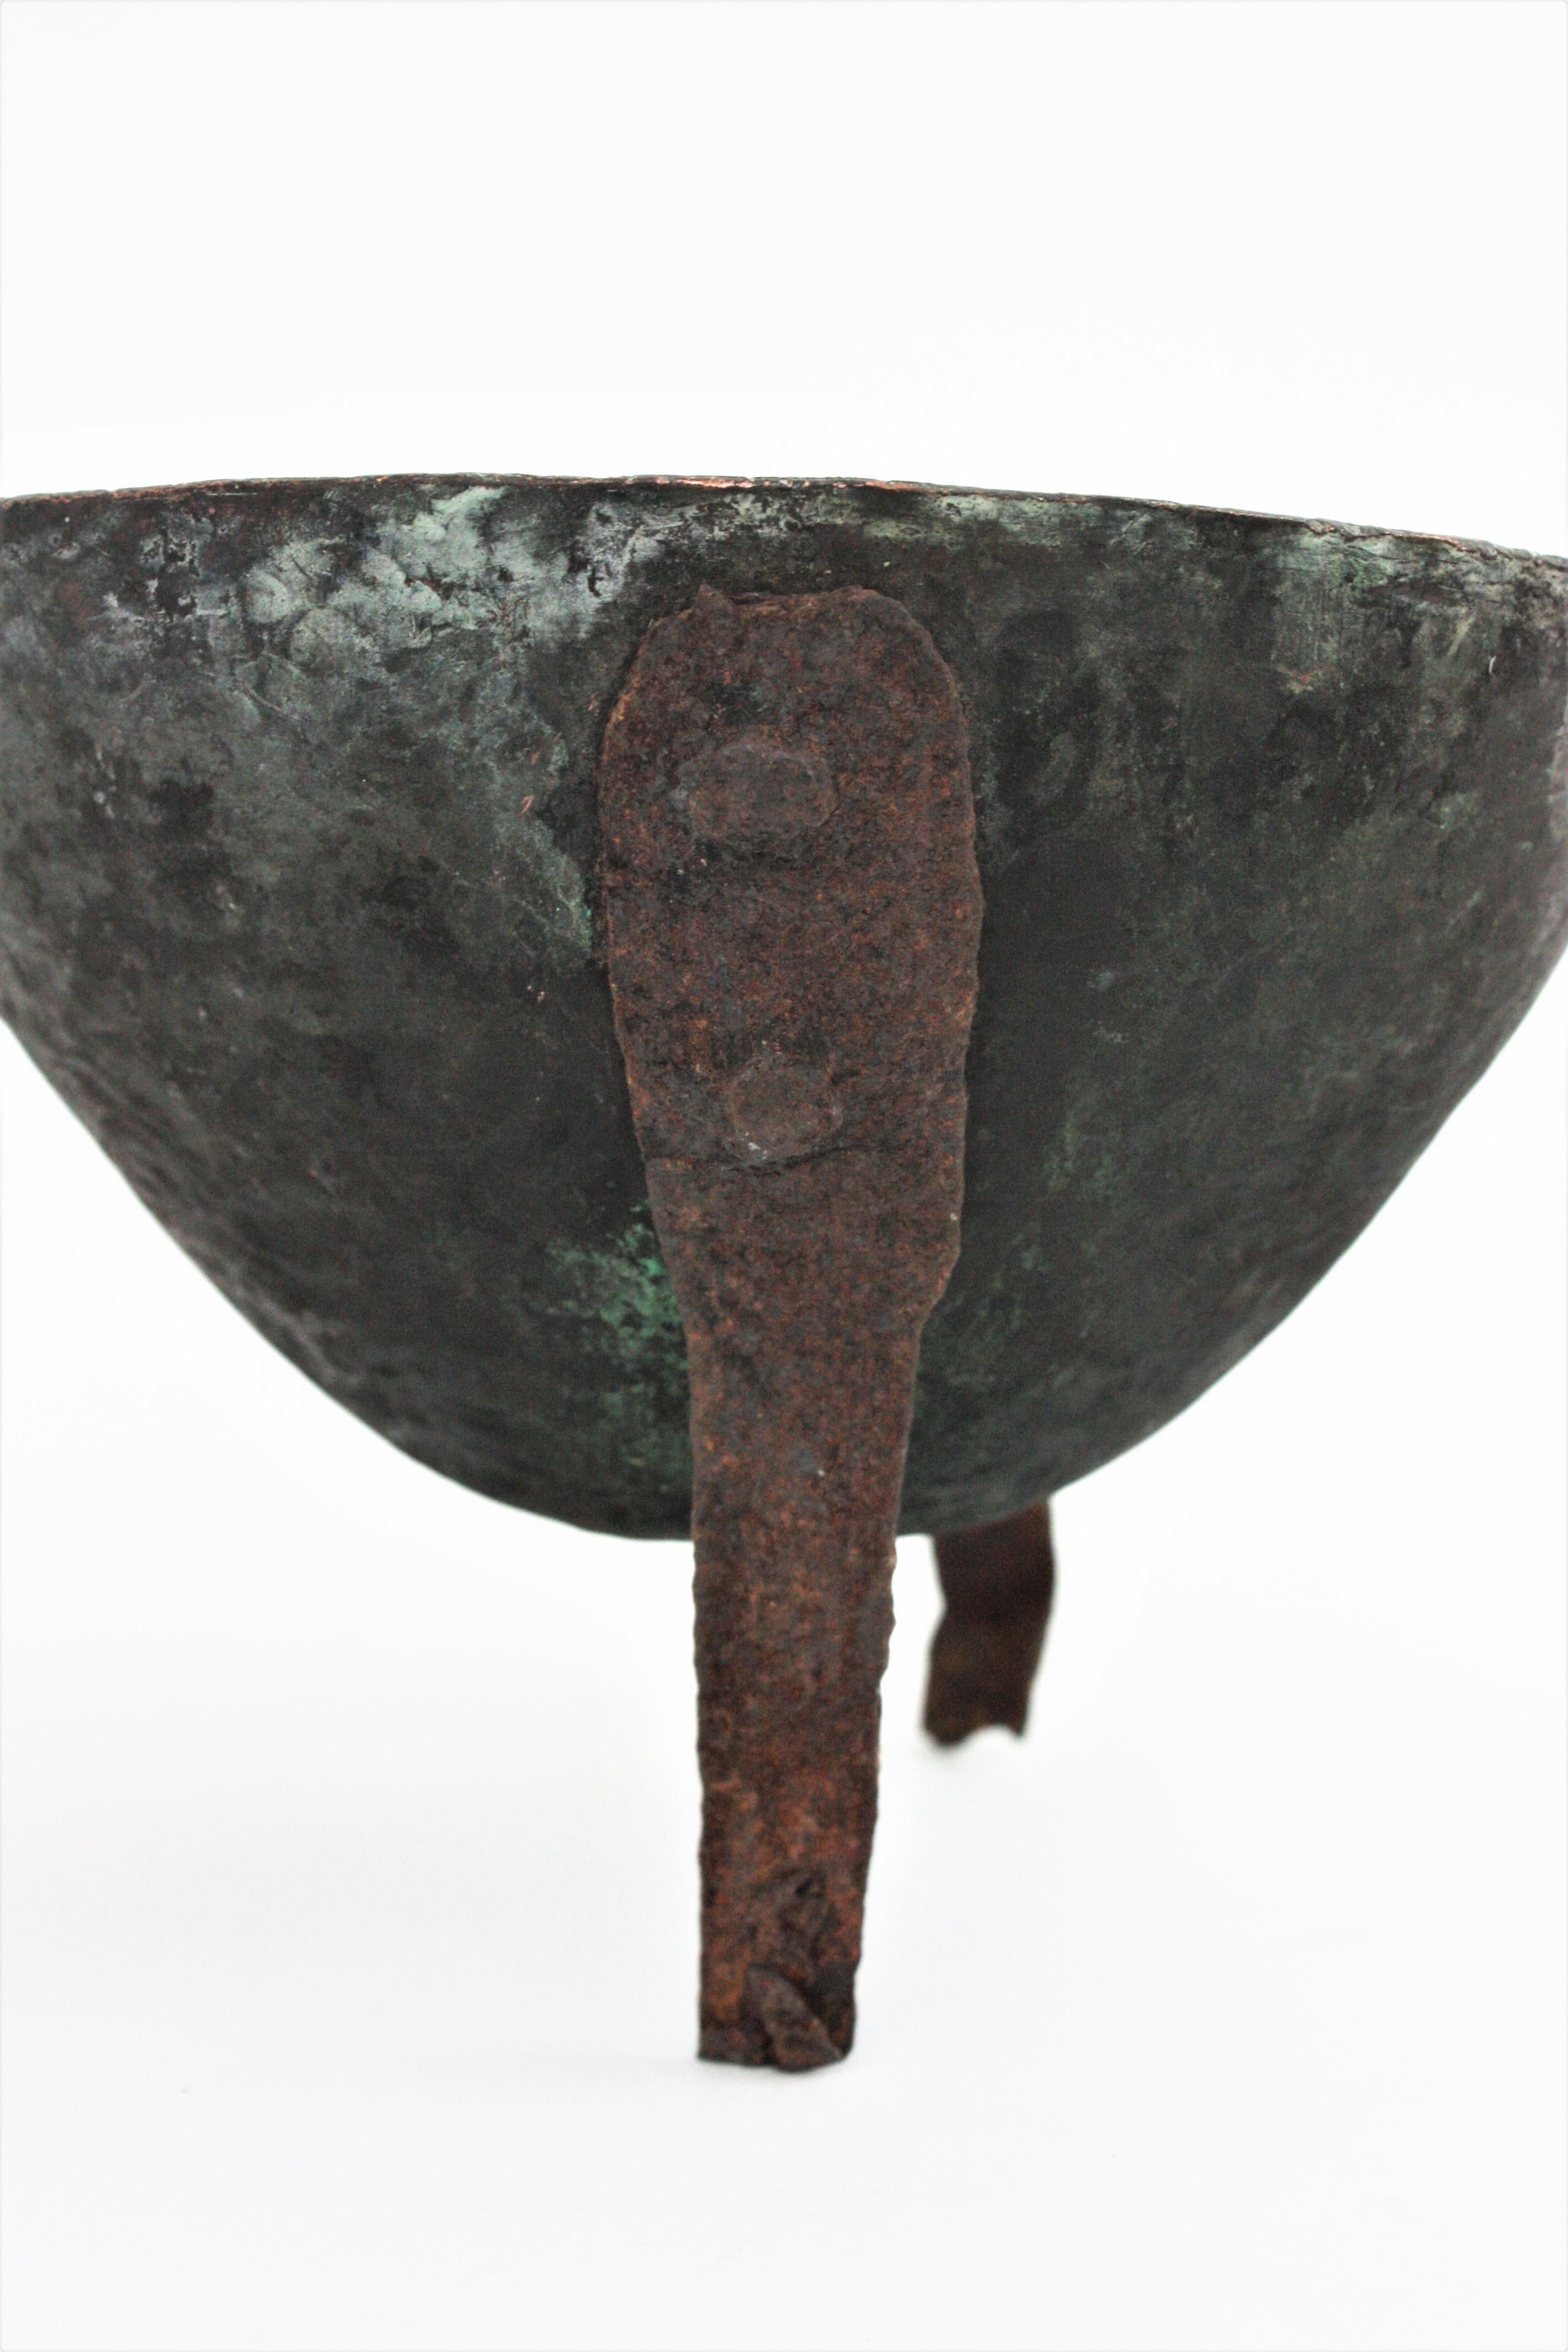 Forged Spanish Foundry Smelting Tool as Centerpiece, Copper and Iron For Sale